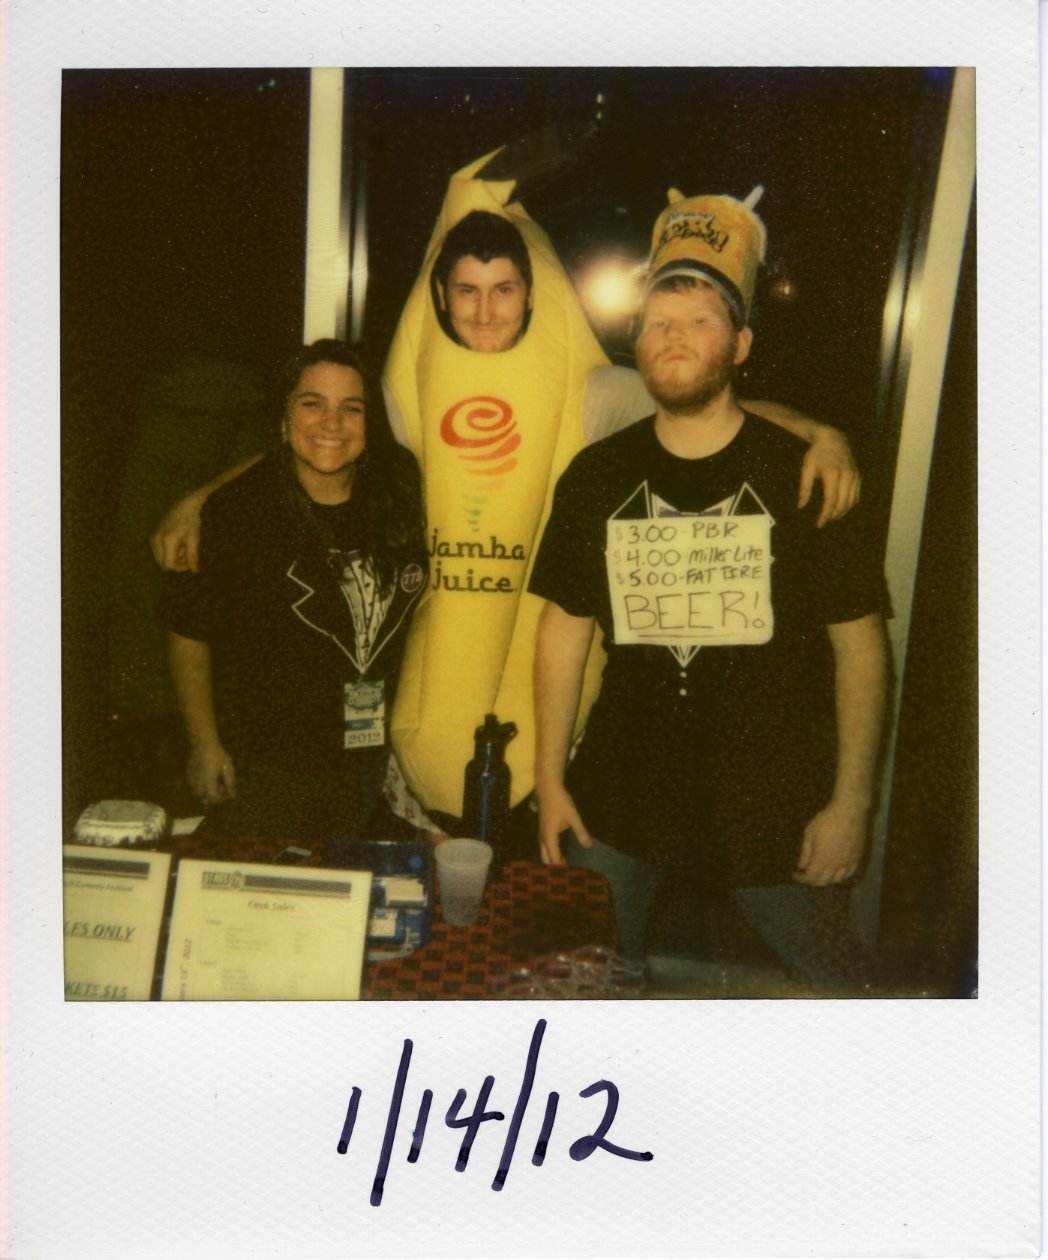 Three people standing at table. From left to right, a woman wearing a t-shirt printed to look like a fake tuxedo, a man wearing a banana costume with a Jamba Juice logo printed on it, and a man wearing a sign advertising beer prices: $3.00 - PBR $4.00 Miller Lite $5.00 Fat Tire BEER!